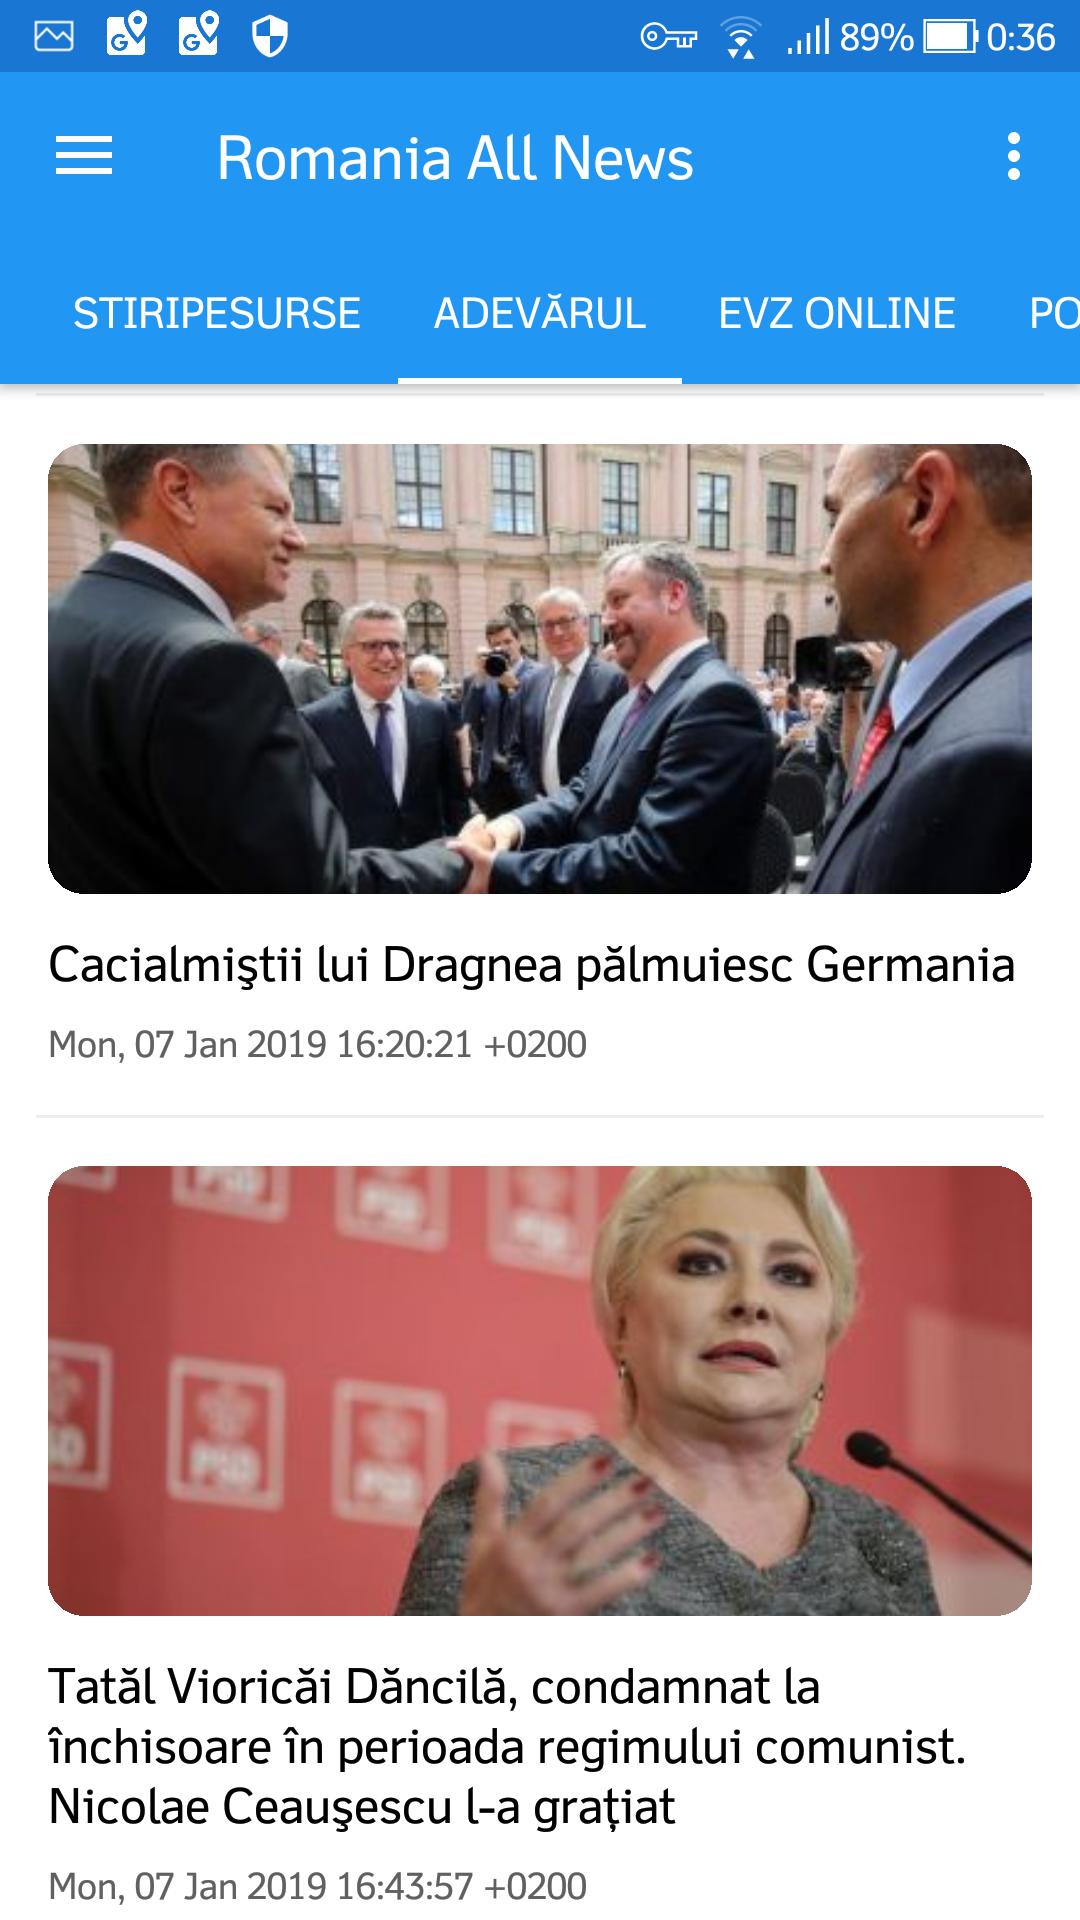 Romania All News For Android Apk Download